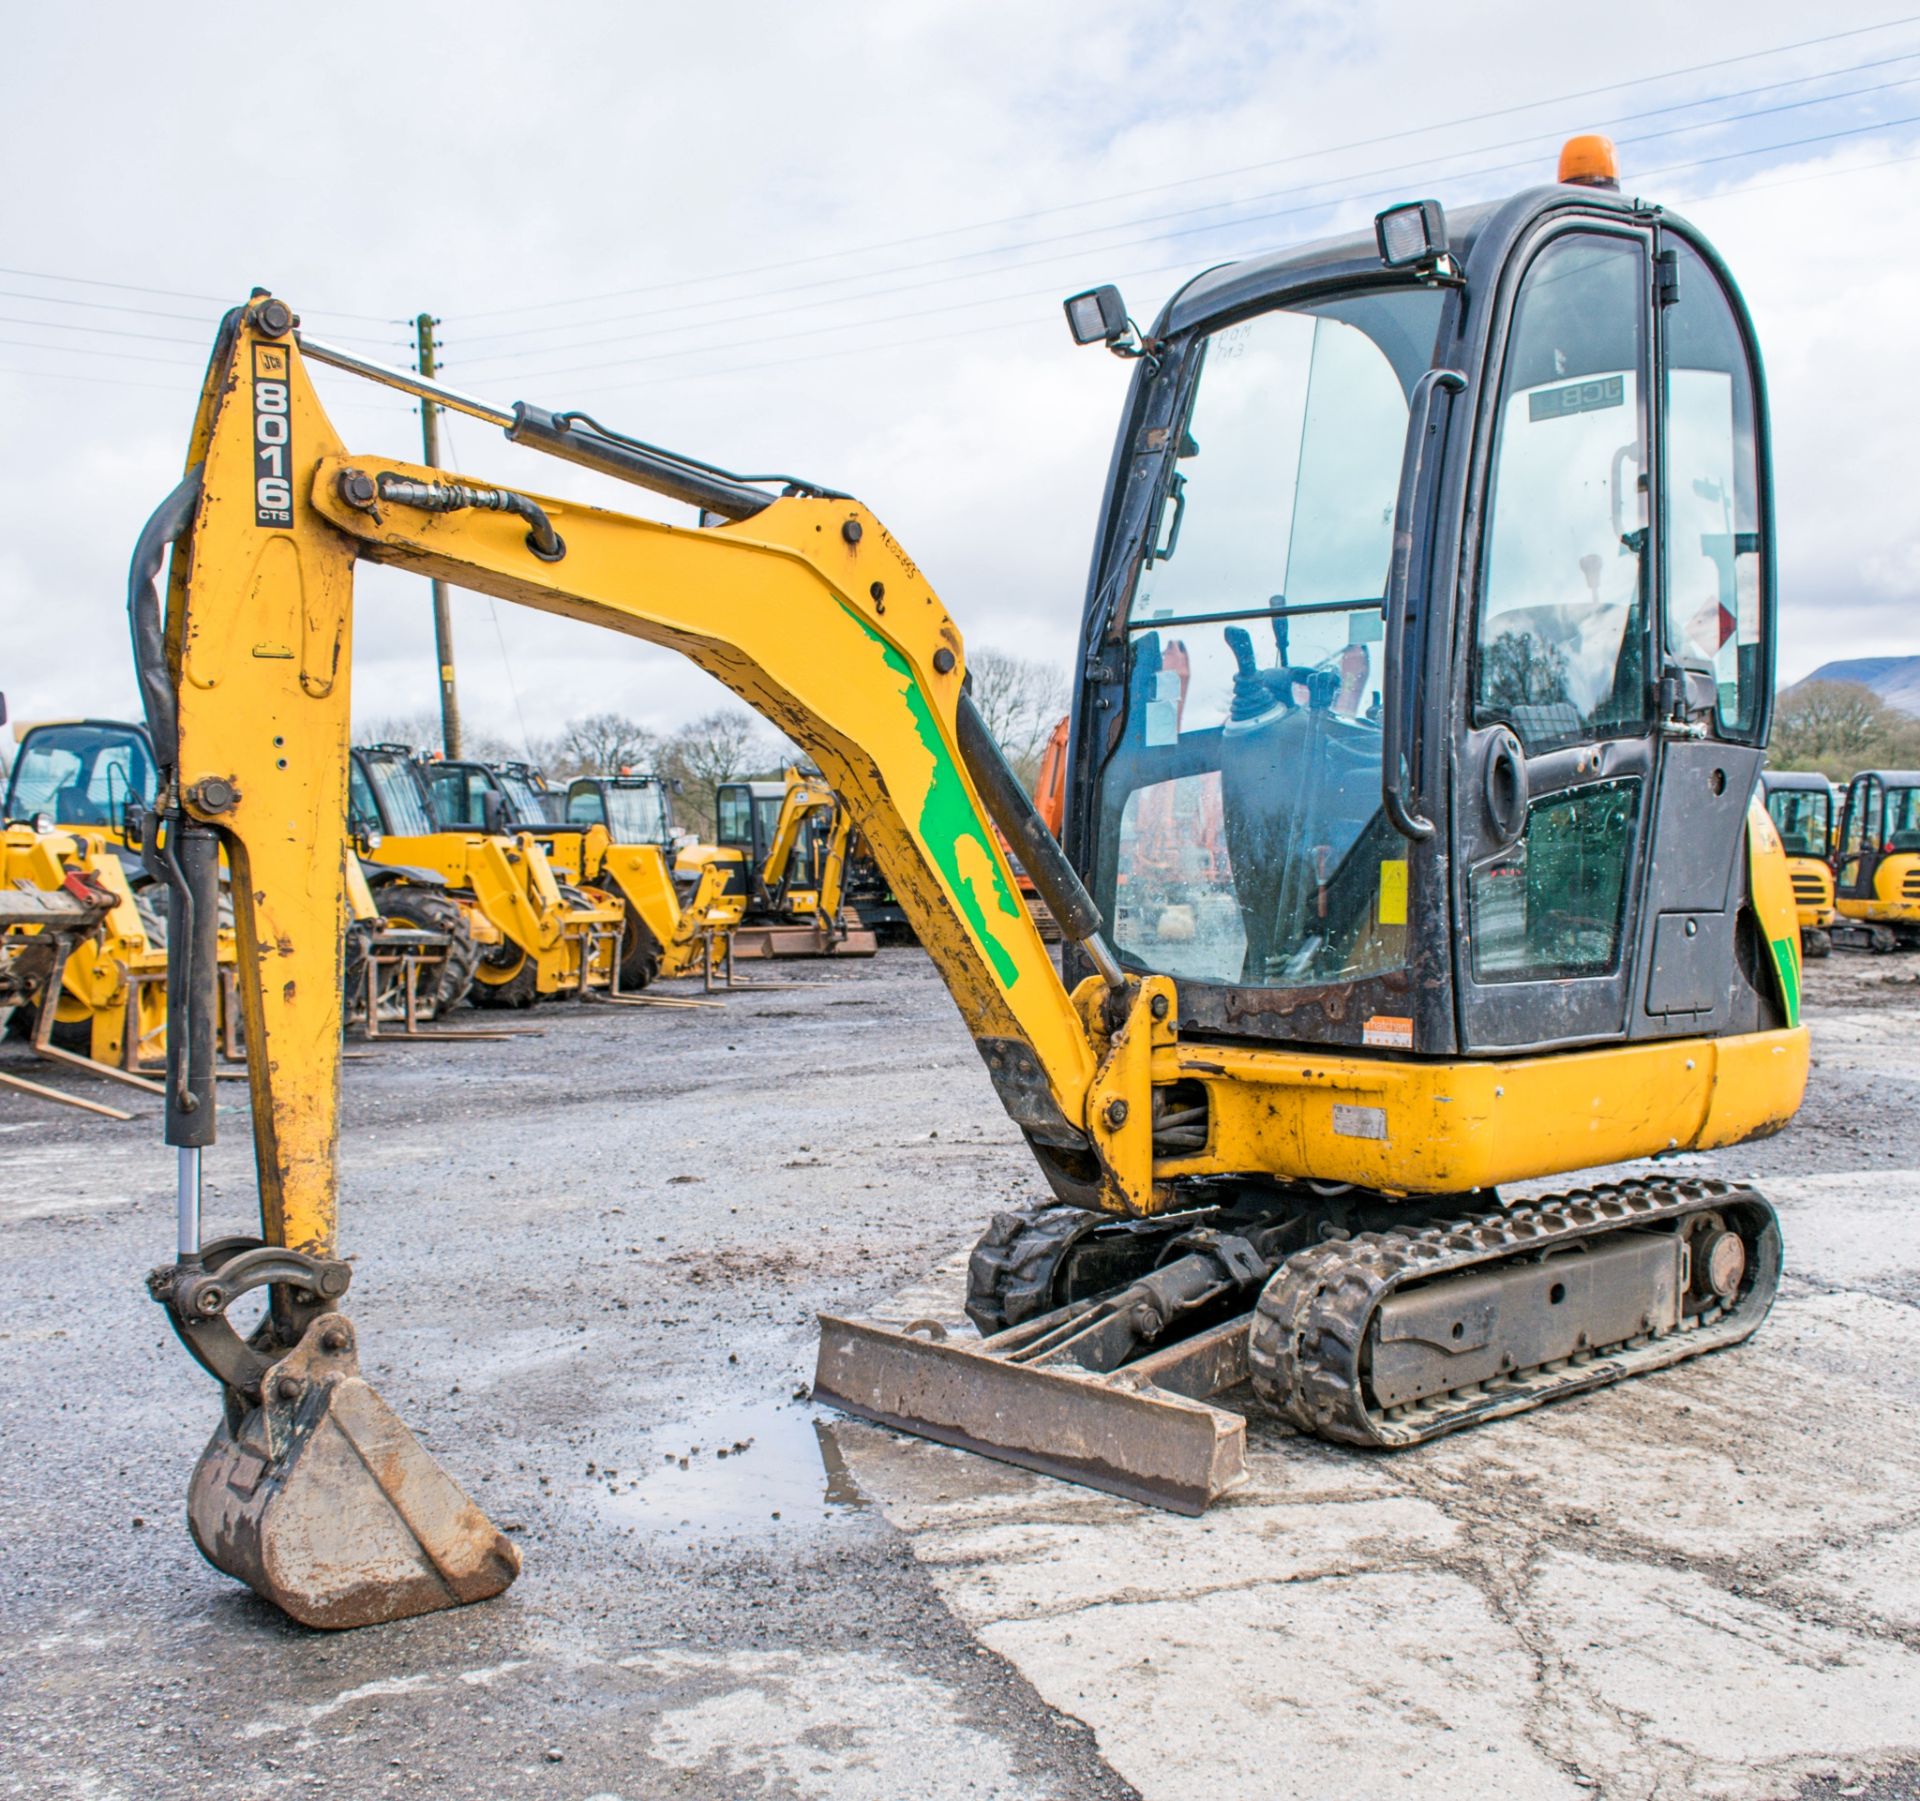 JCB 801.6 CTS 1.5 tonne rubber tracked mini excavator Year: 2013 S/N: 20171389 Recorded Hours: